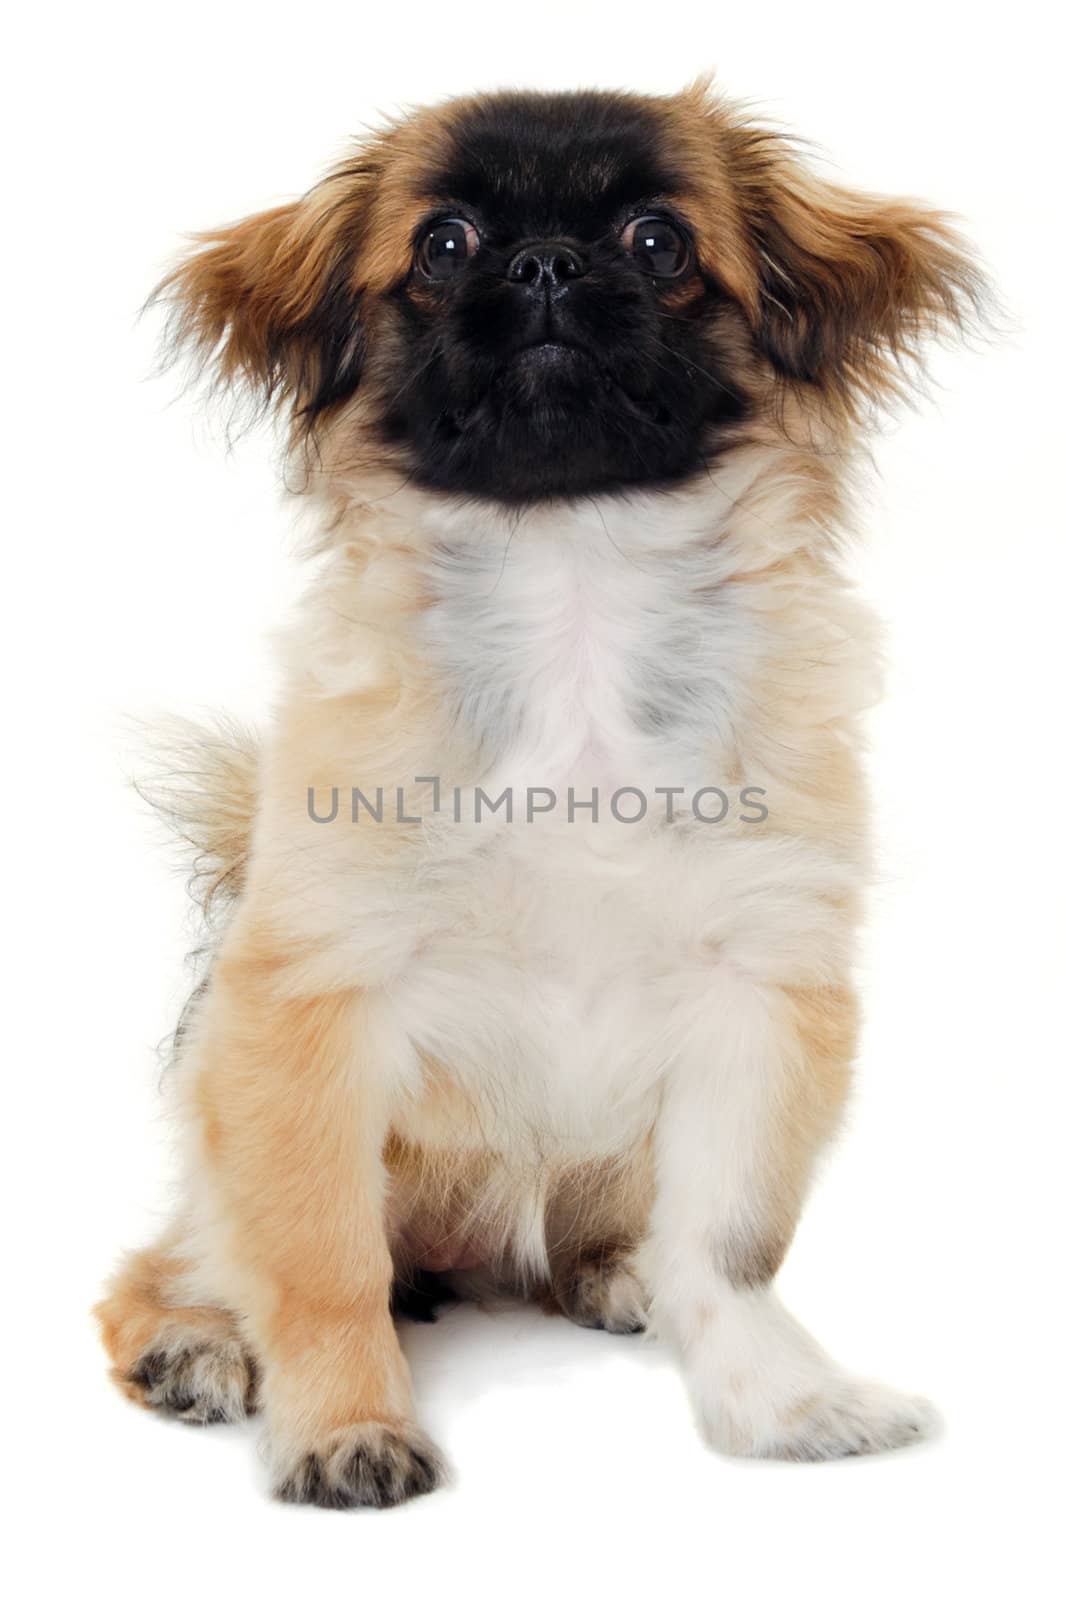 A sweet puppy dog is sitting and resting on a white background